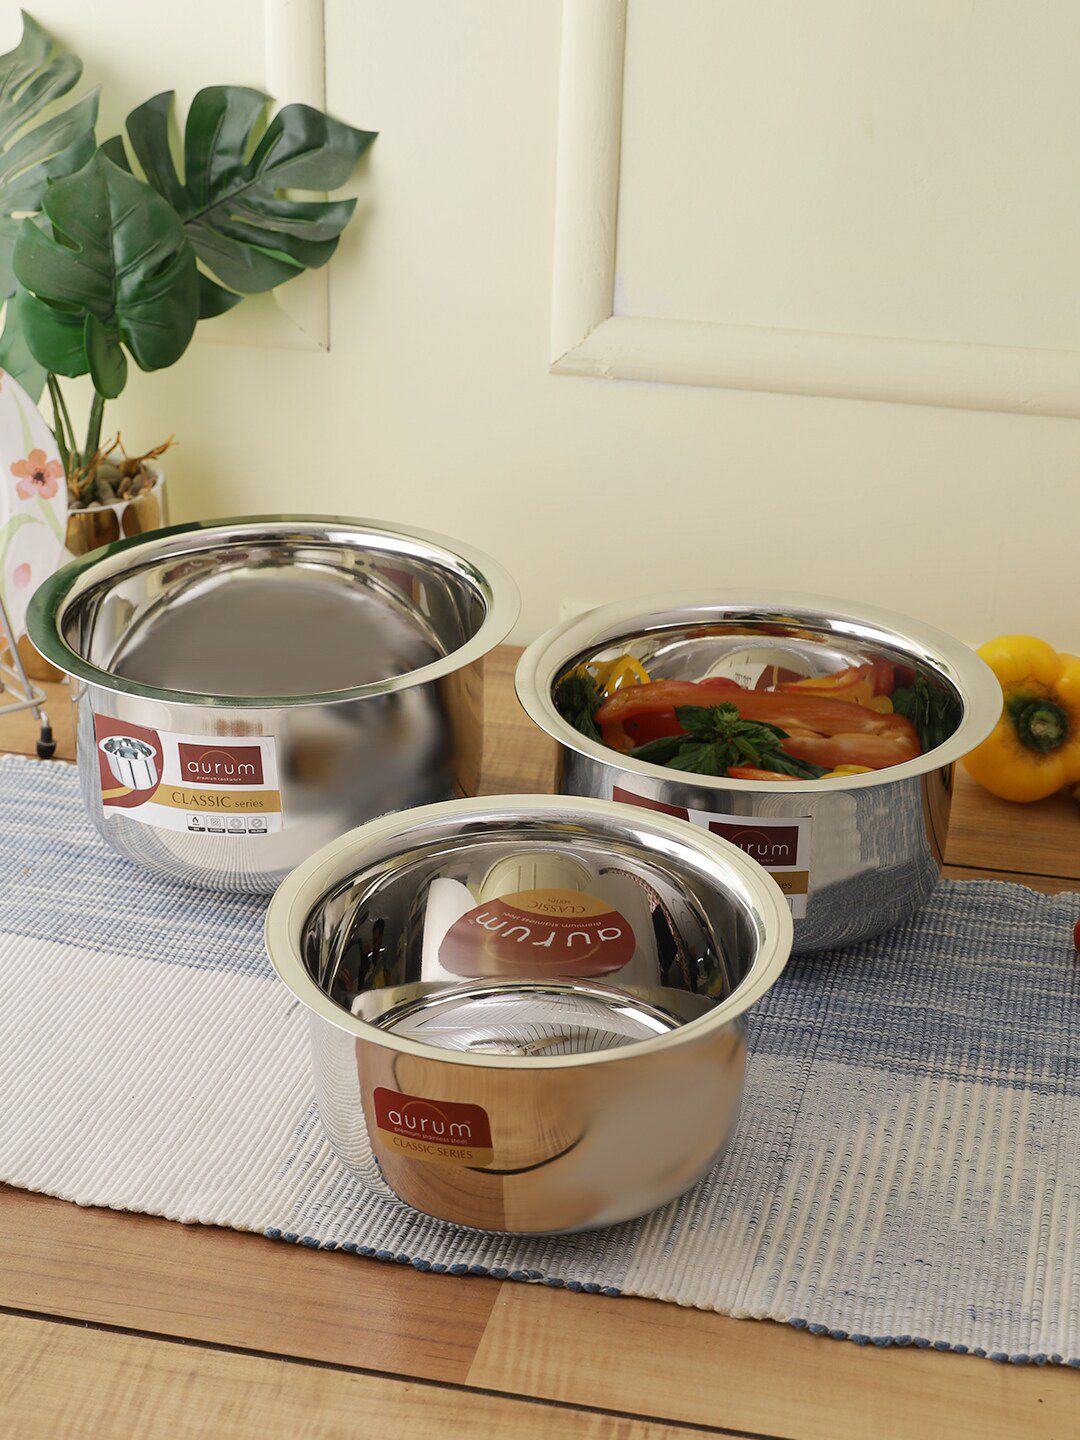 AURUM Silver-Toned Set of 3 Stainless Steel Cookware Price in India